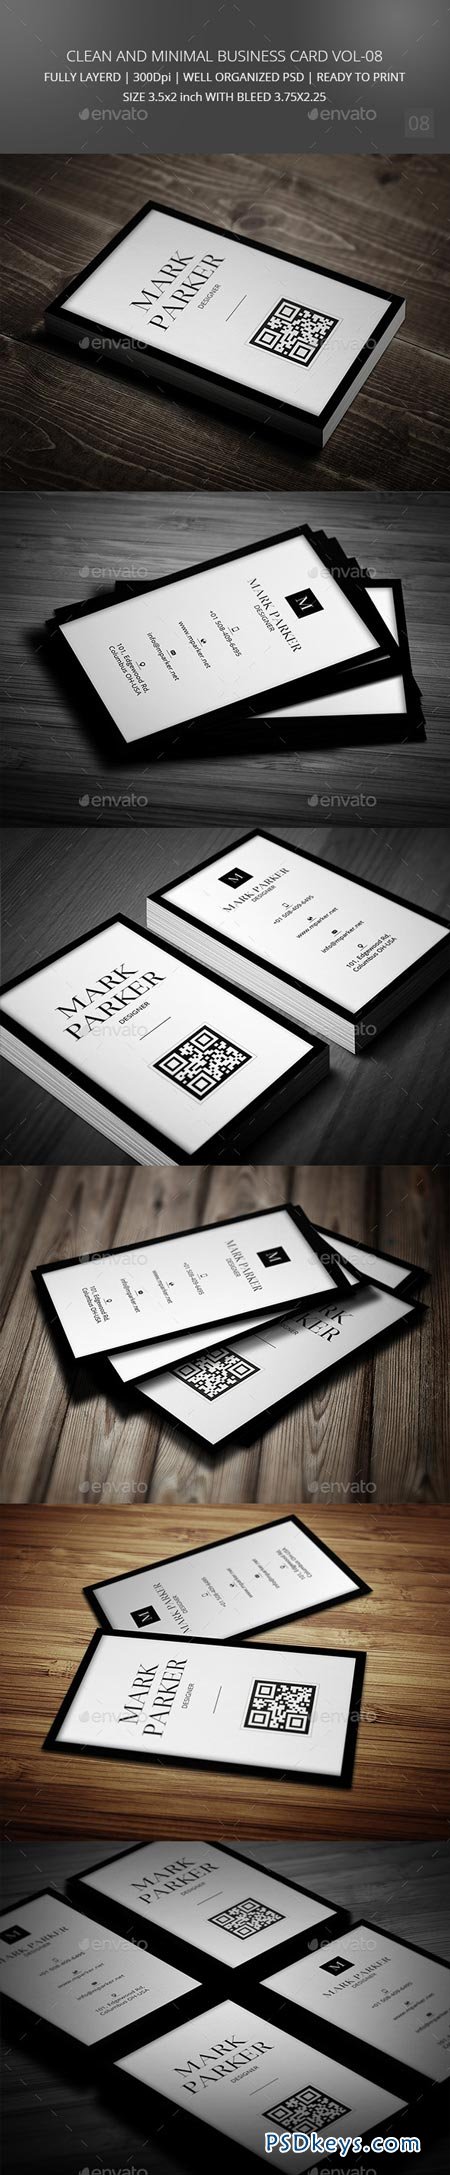 Clean and Minimal Business Card Vol-08 8989098